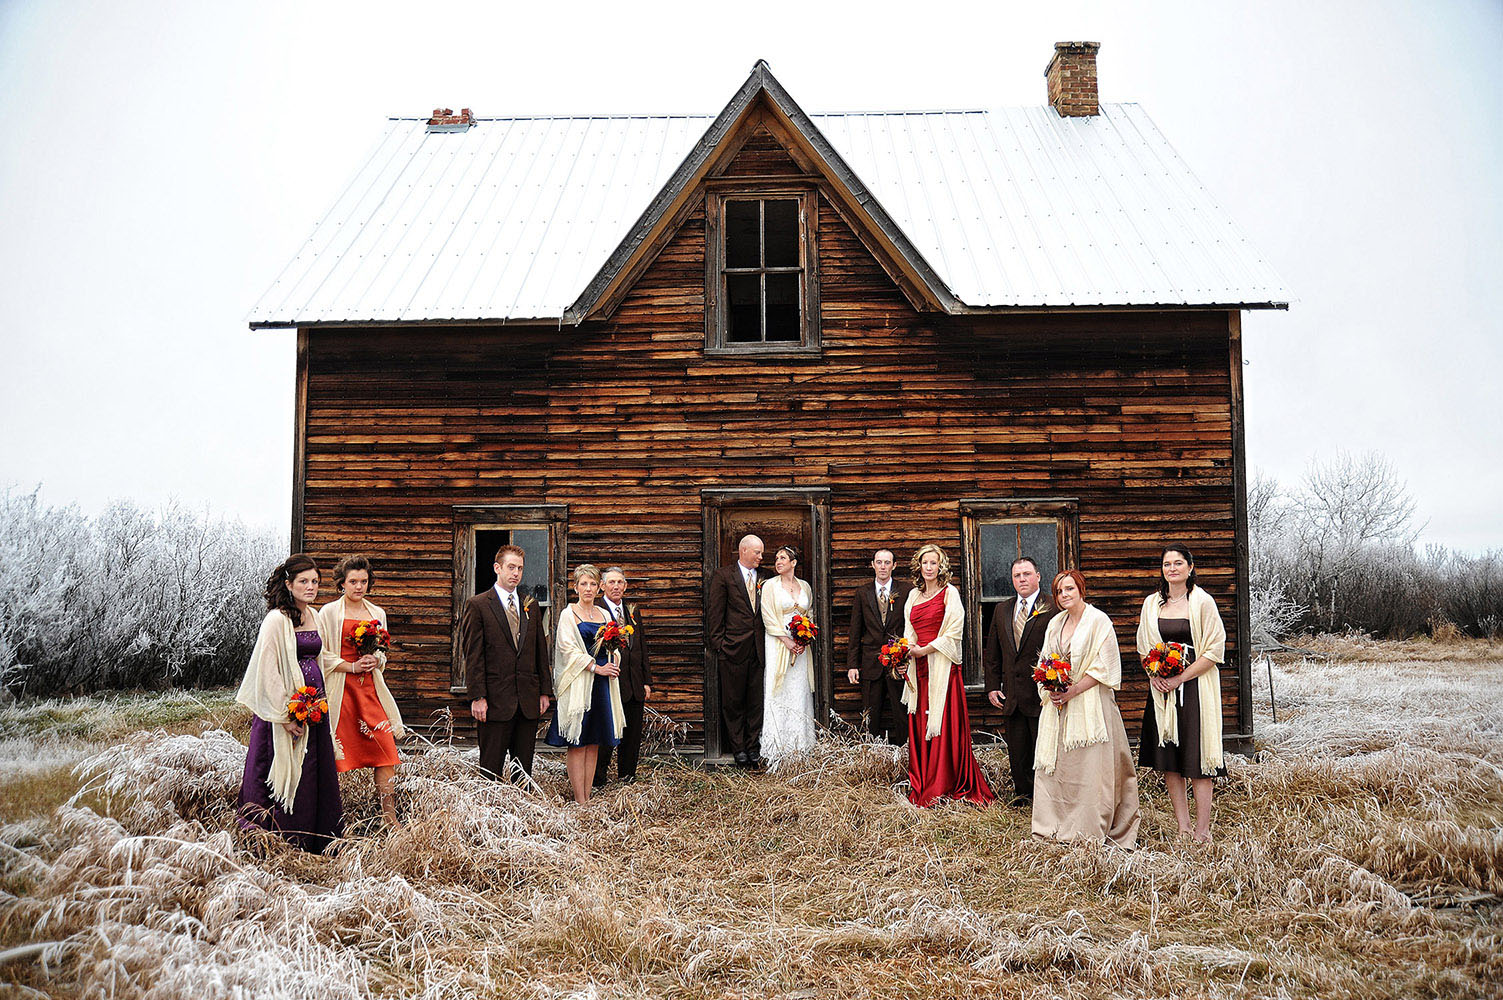 Wedding party in front of old cabin